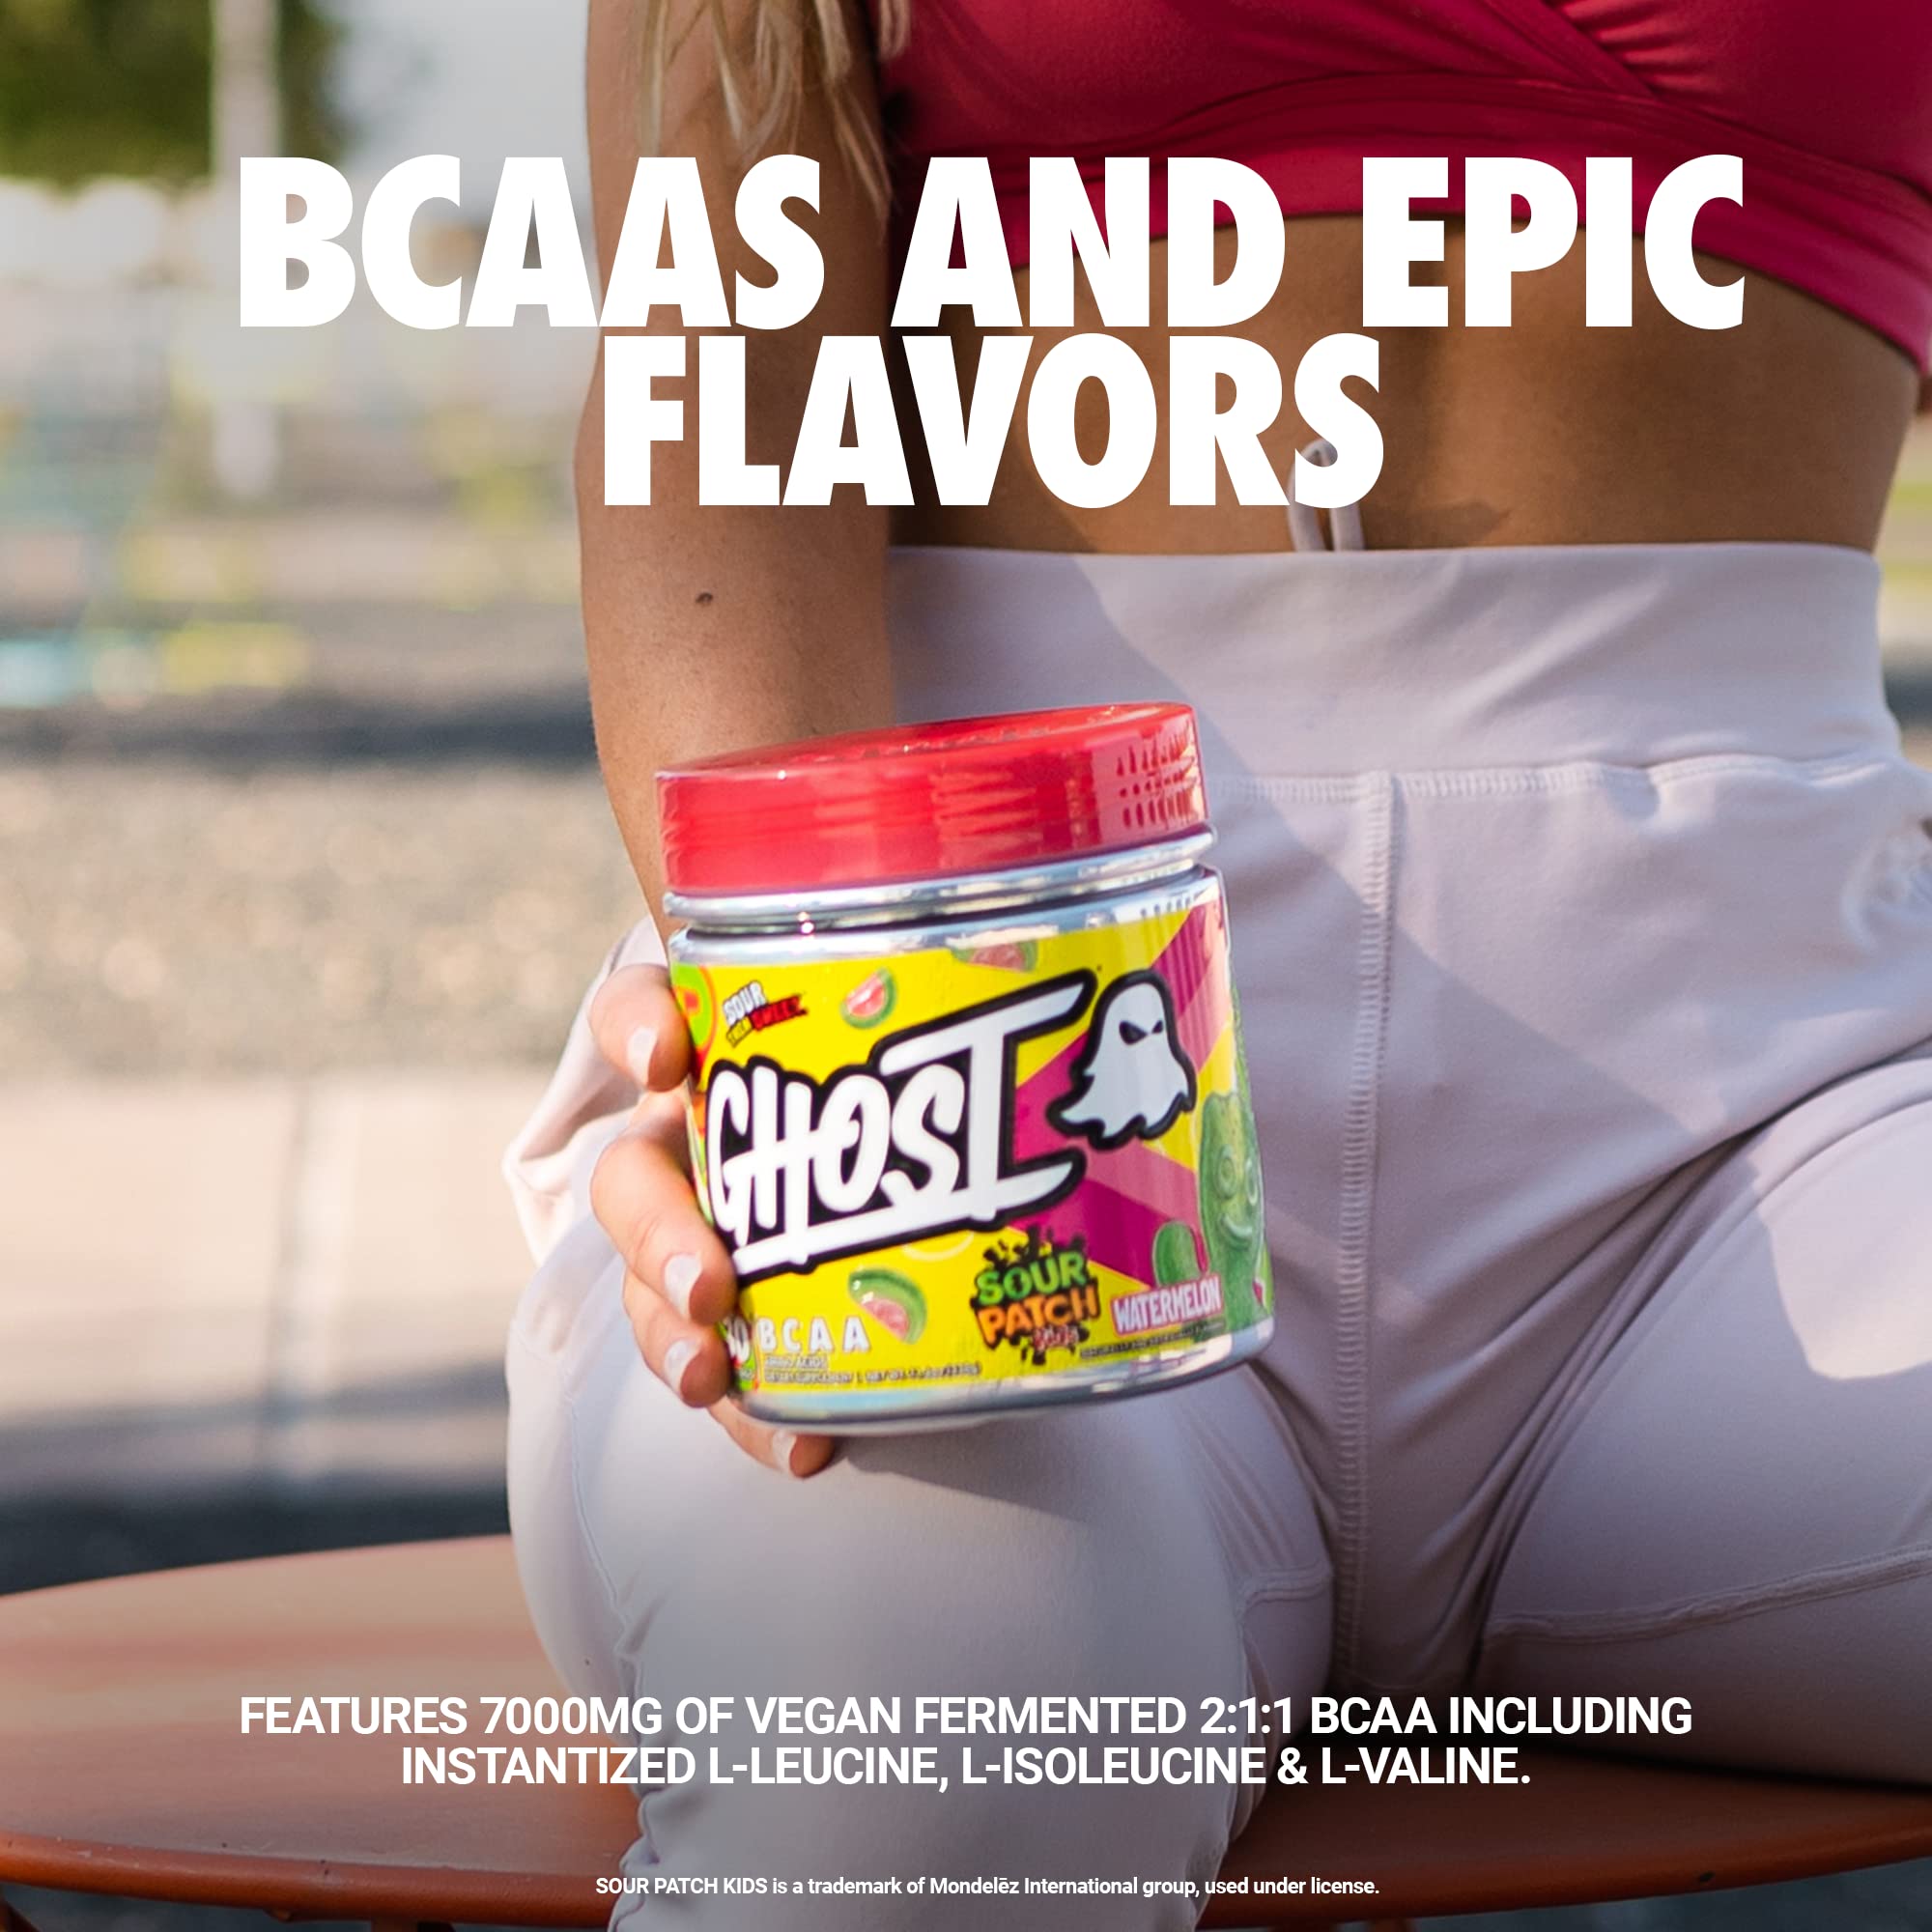 GHOST BCAA Amino Acids, Sour Patch Kids Blue Raspberry - 30 Servings - Sugar-Free Intra & Post Workout Powder & Recovery Drink, 7g BCAA Supports Muscle Growth & Endurance - Soy & Gluten-Free, Vegan